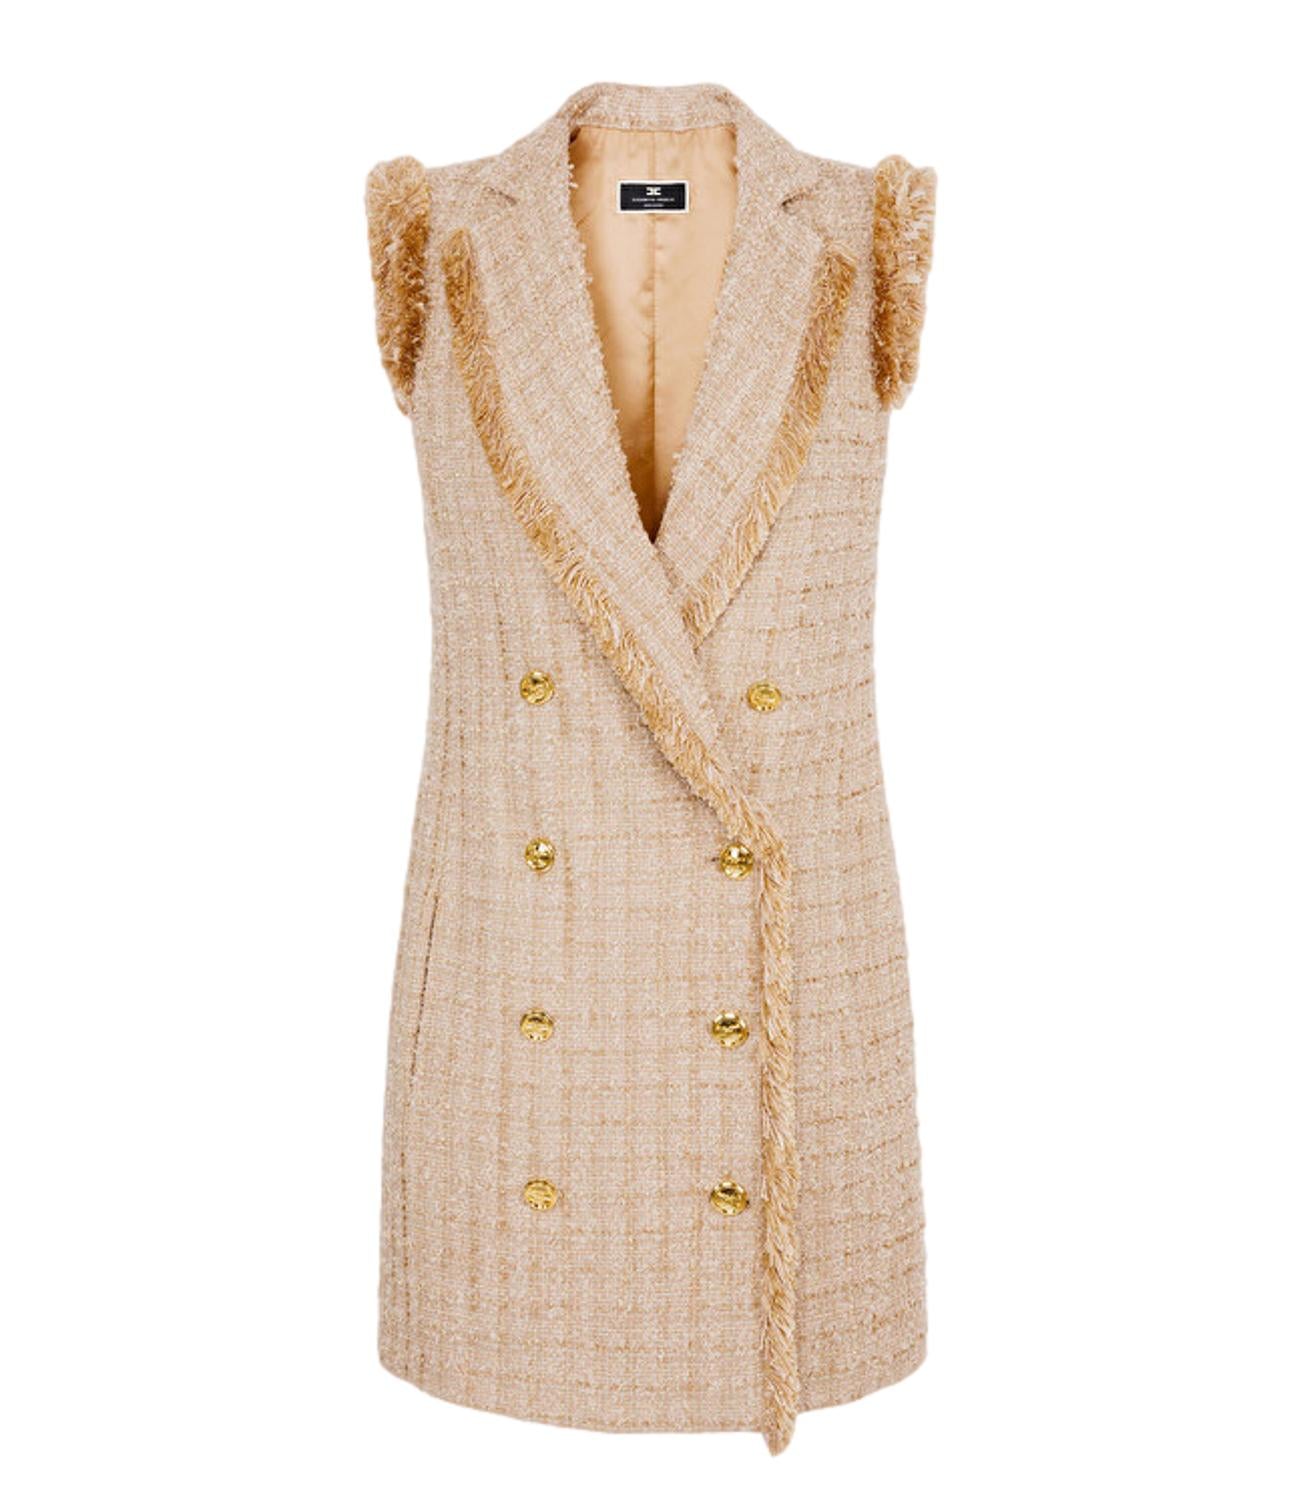 Double-breasted women's dress with gold buttons